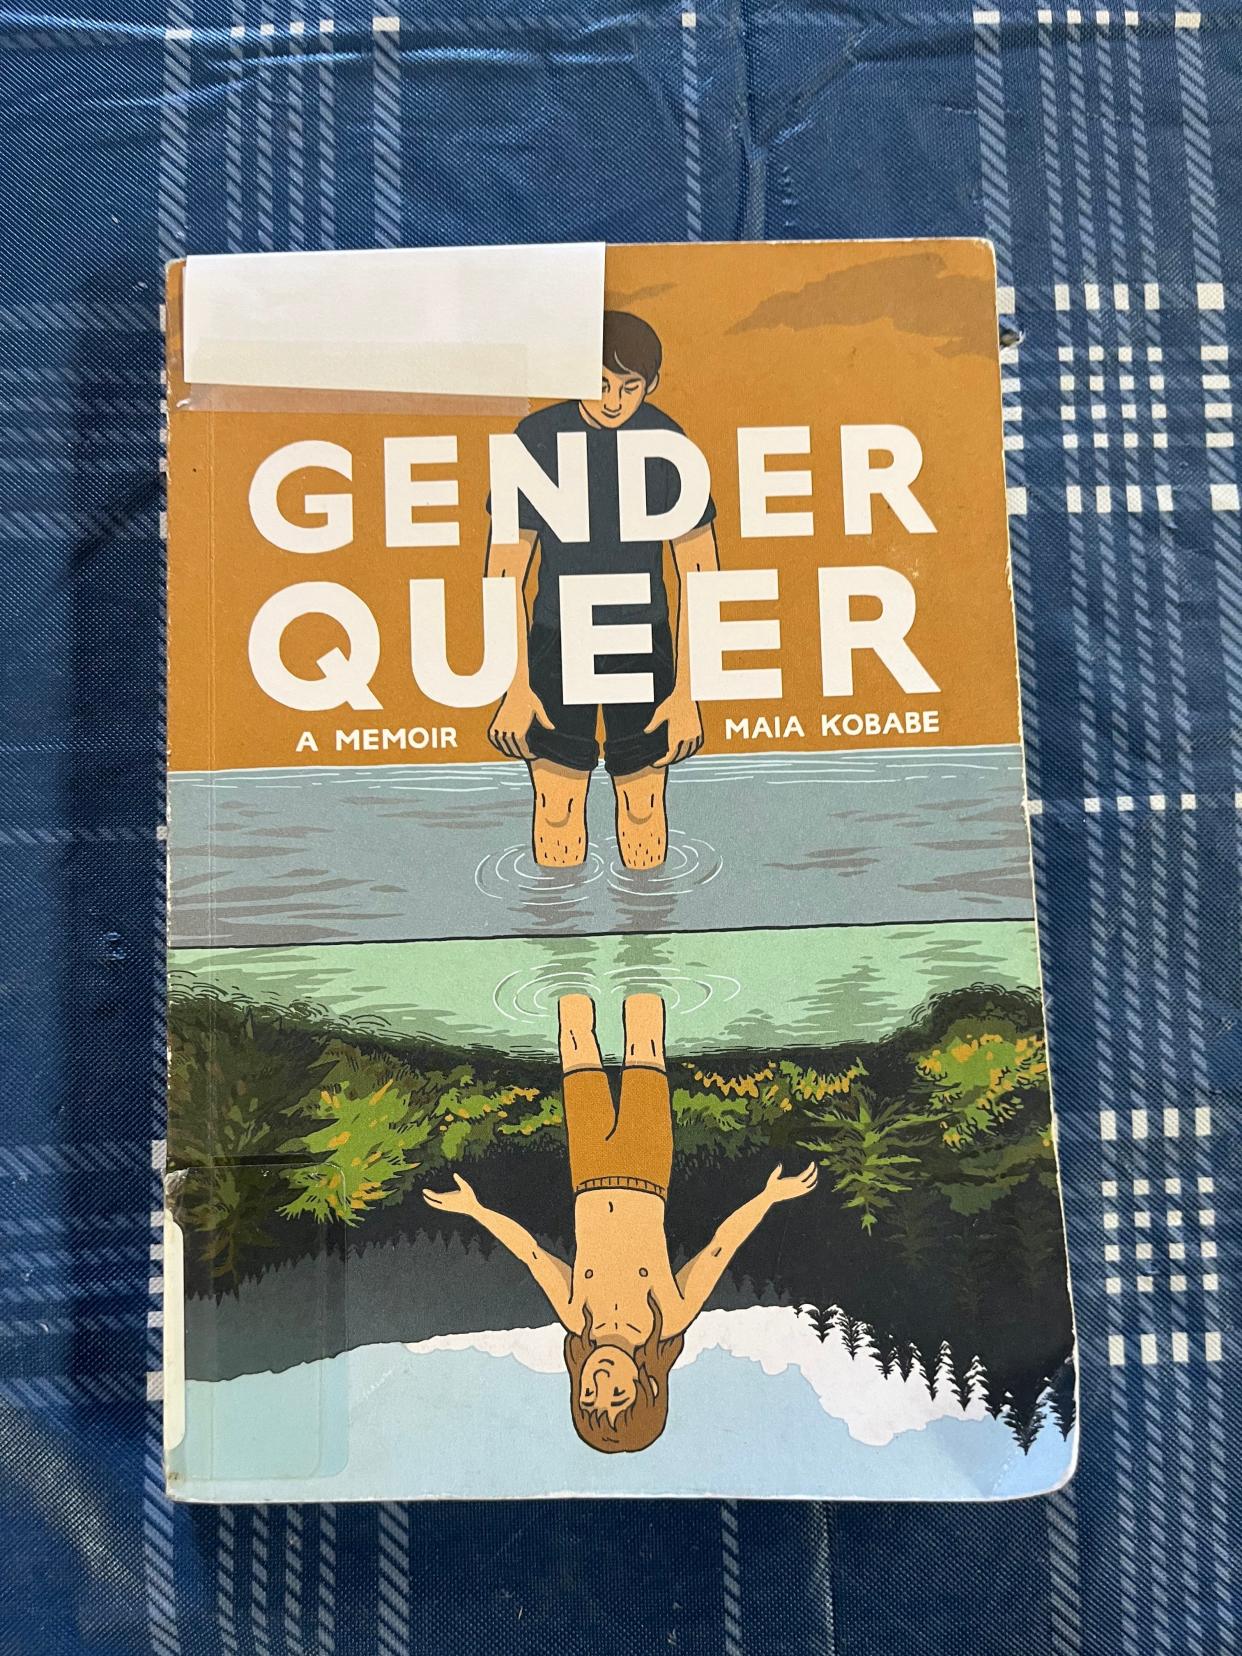 A copy of "Gender Queer: A Memoir." Some members of the Deckerville Community are requesting the book be removed from shelves according to the Deckerville Library